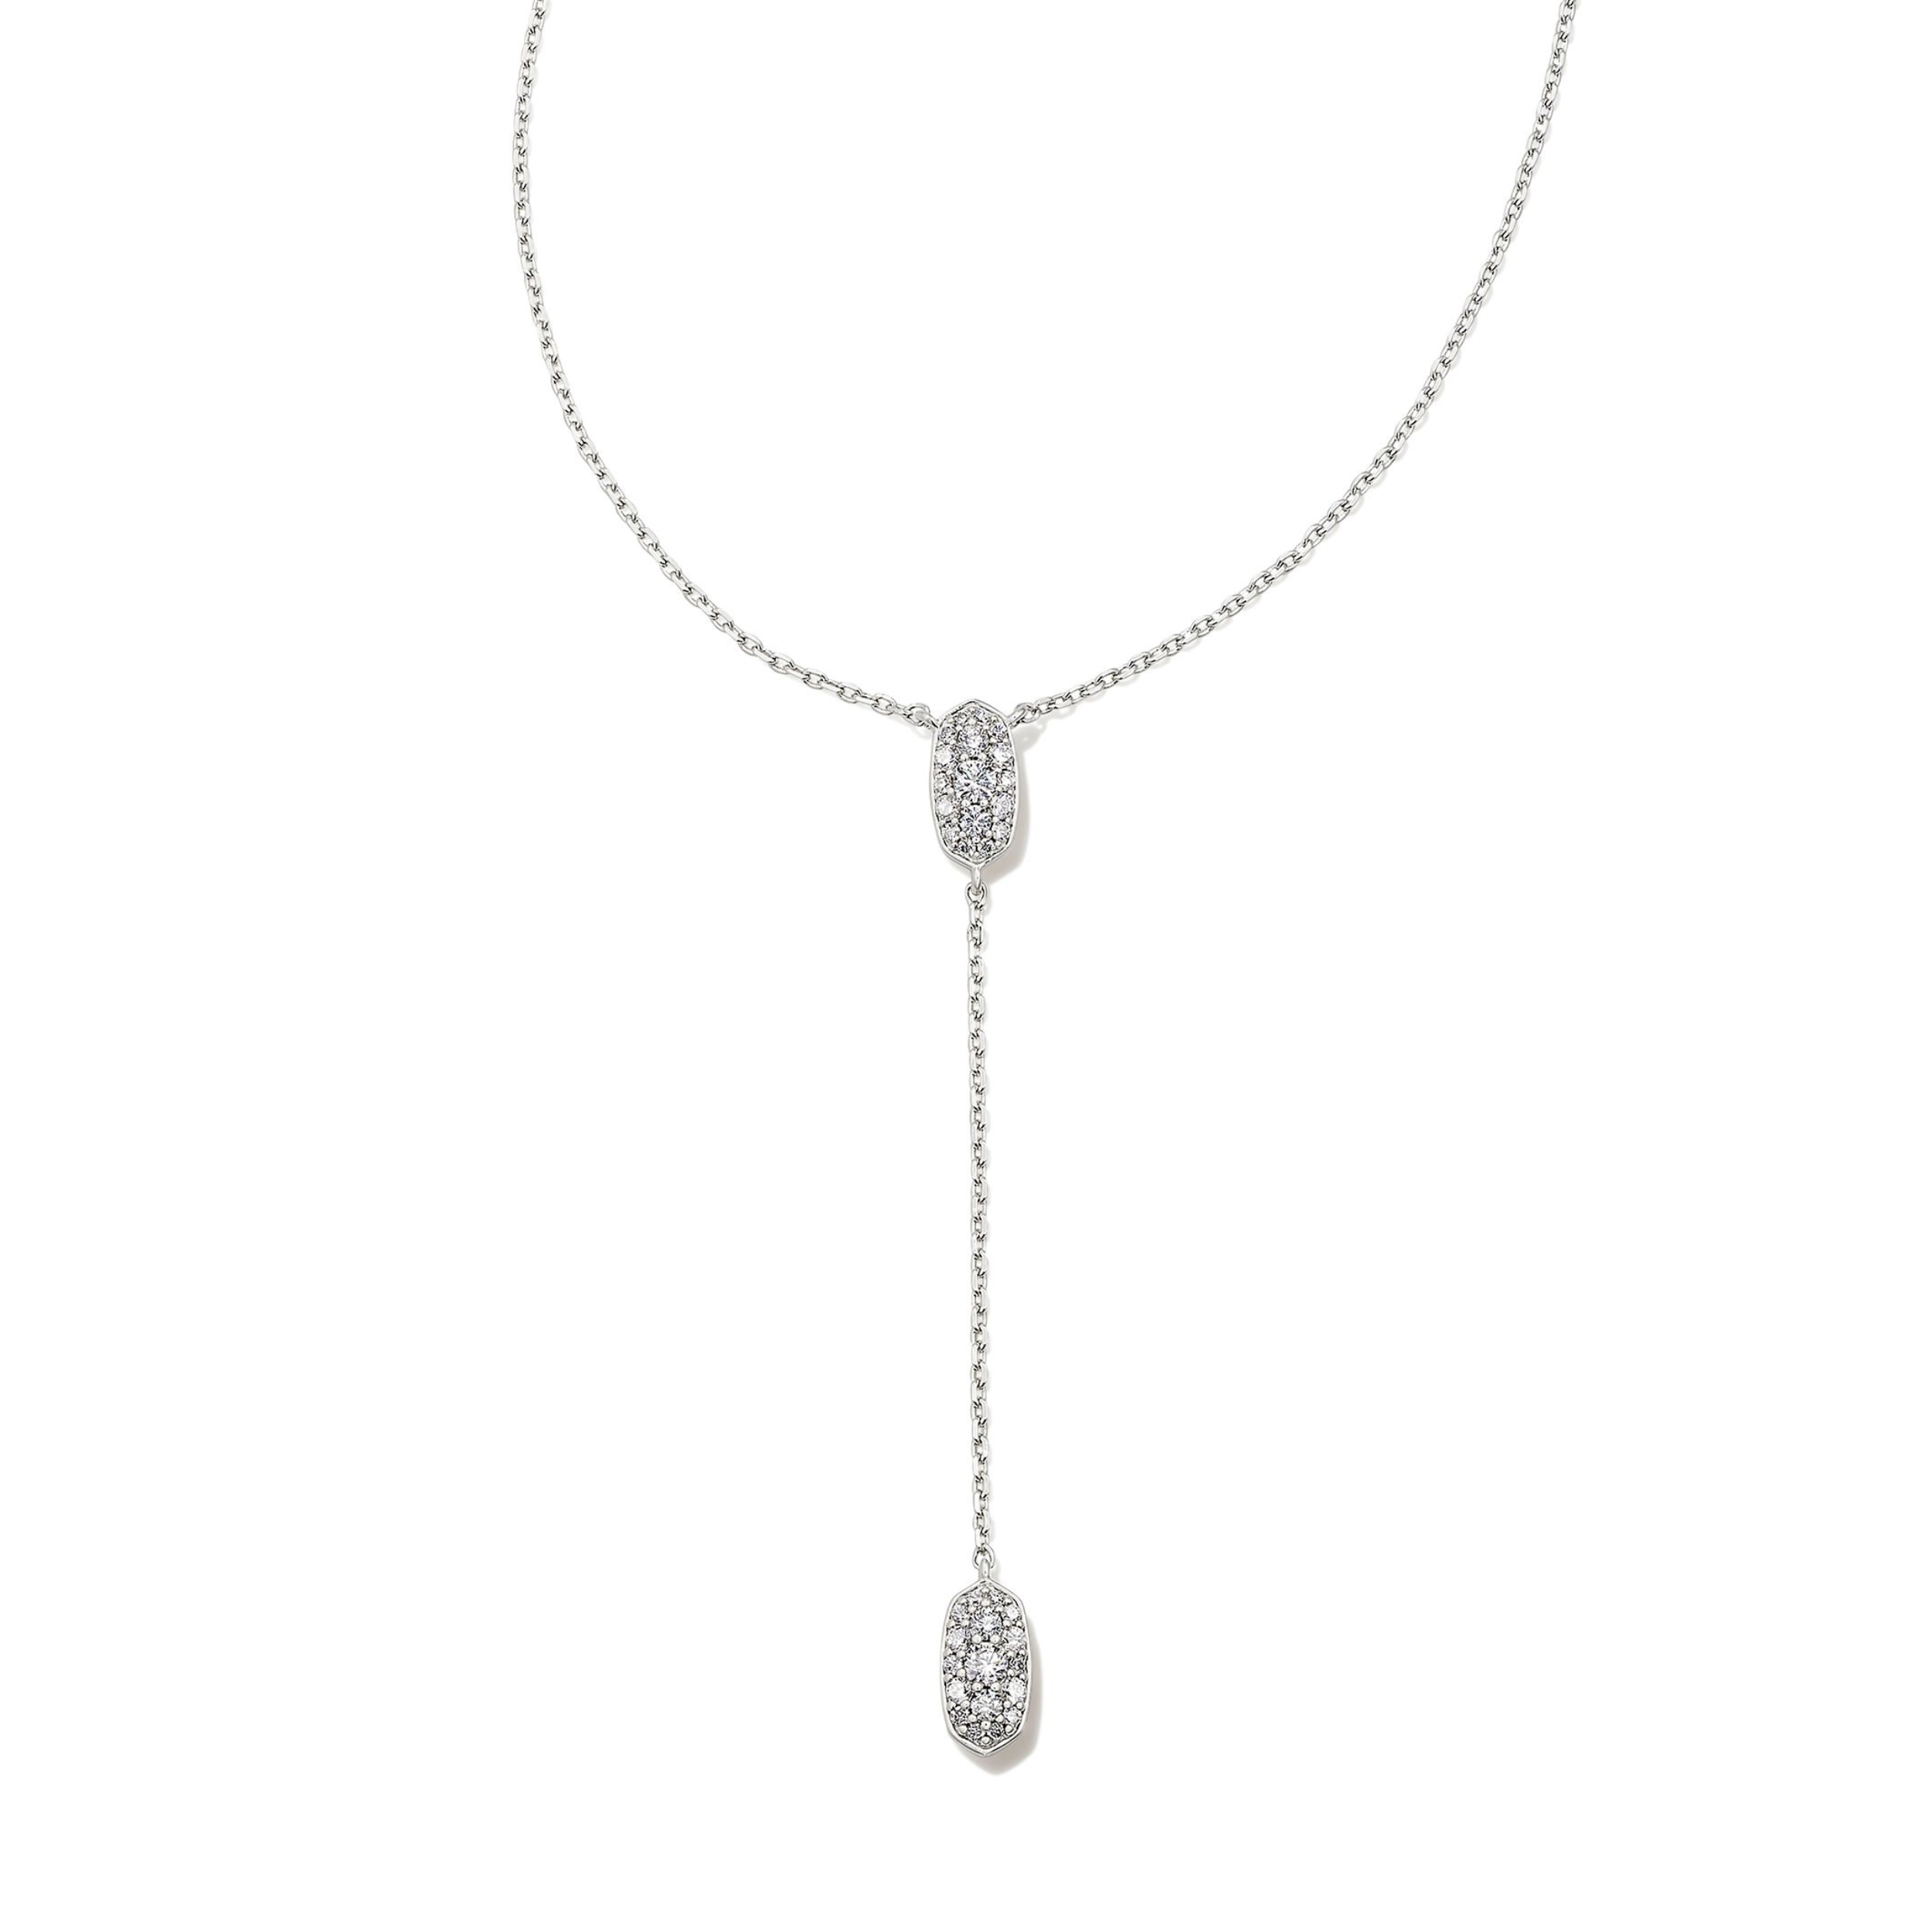 Silver, lariat chain necklace with clear crystals pictured on a white background. 